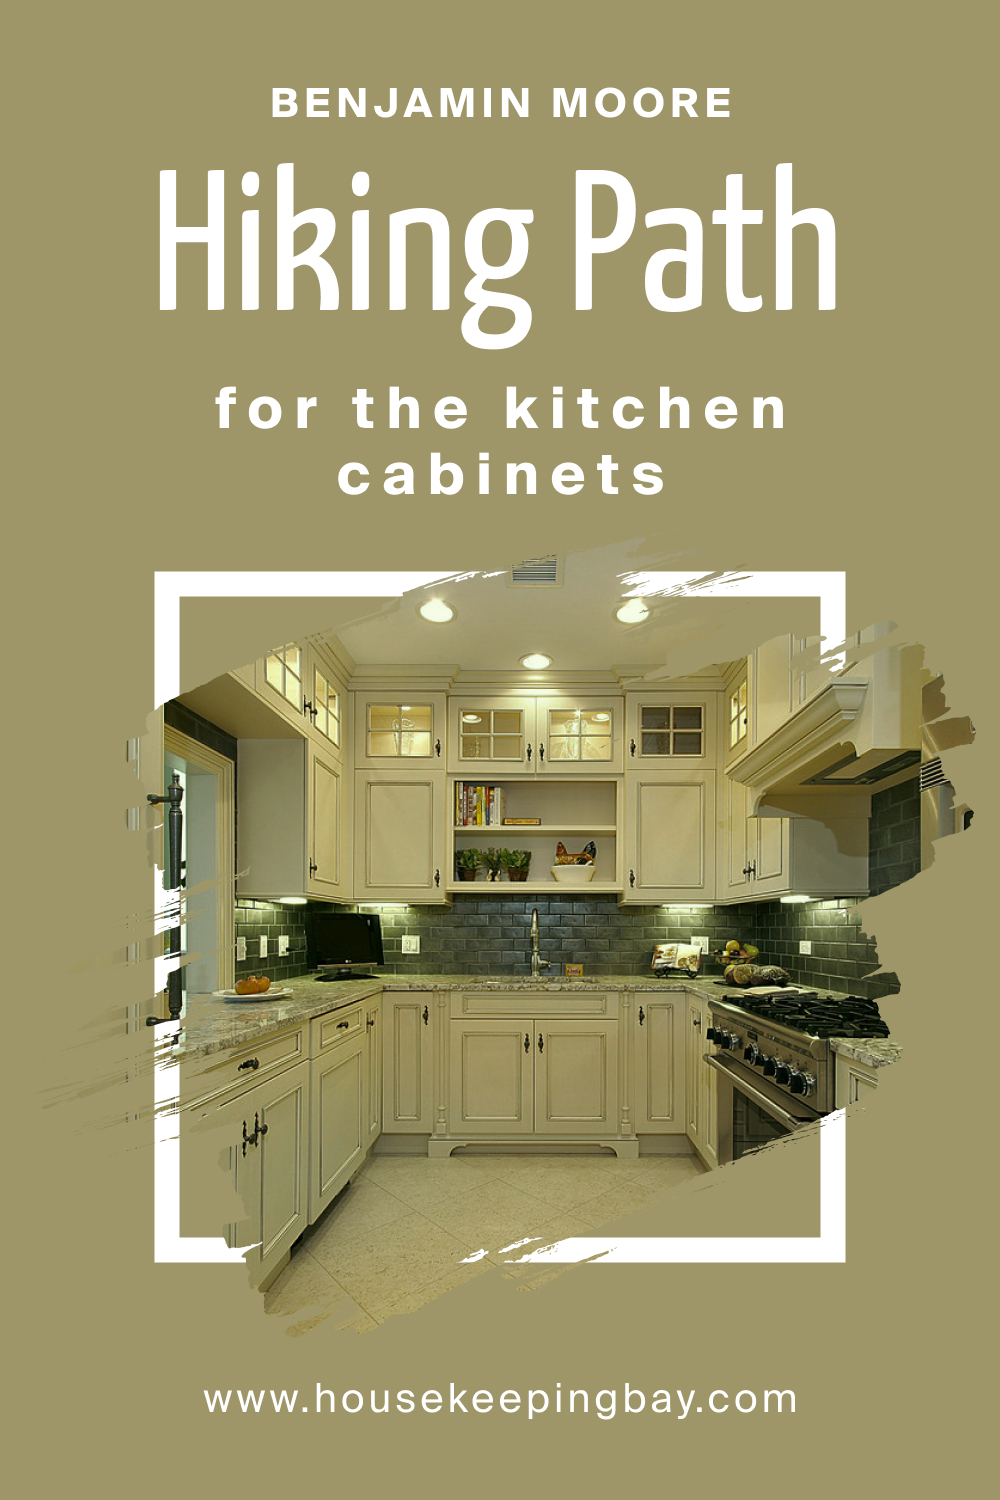 How to Use BM Hiking Path 524 on Kitchen Cabinets?